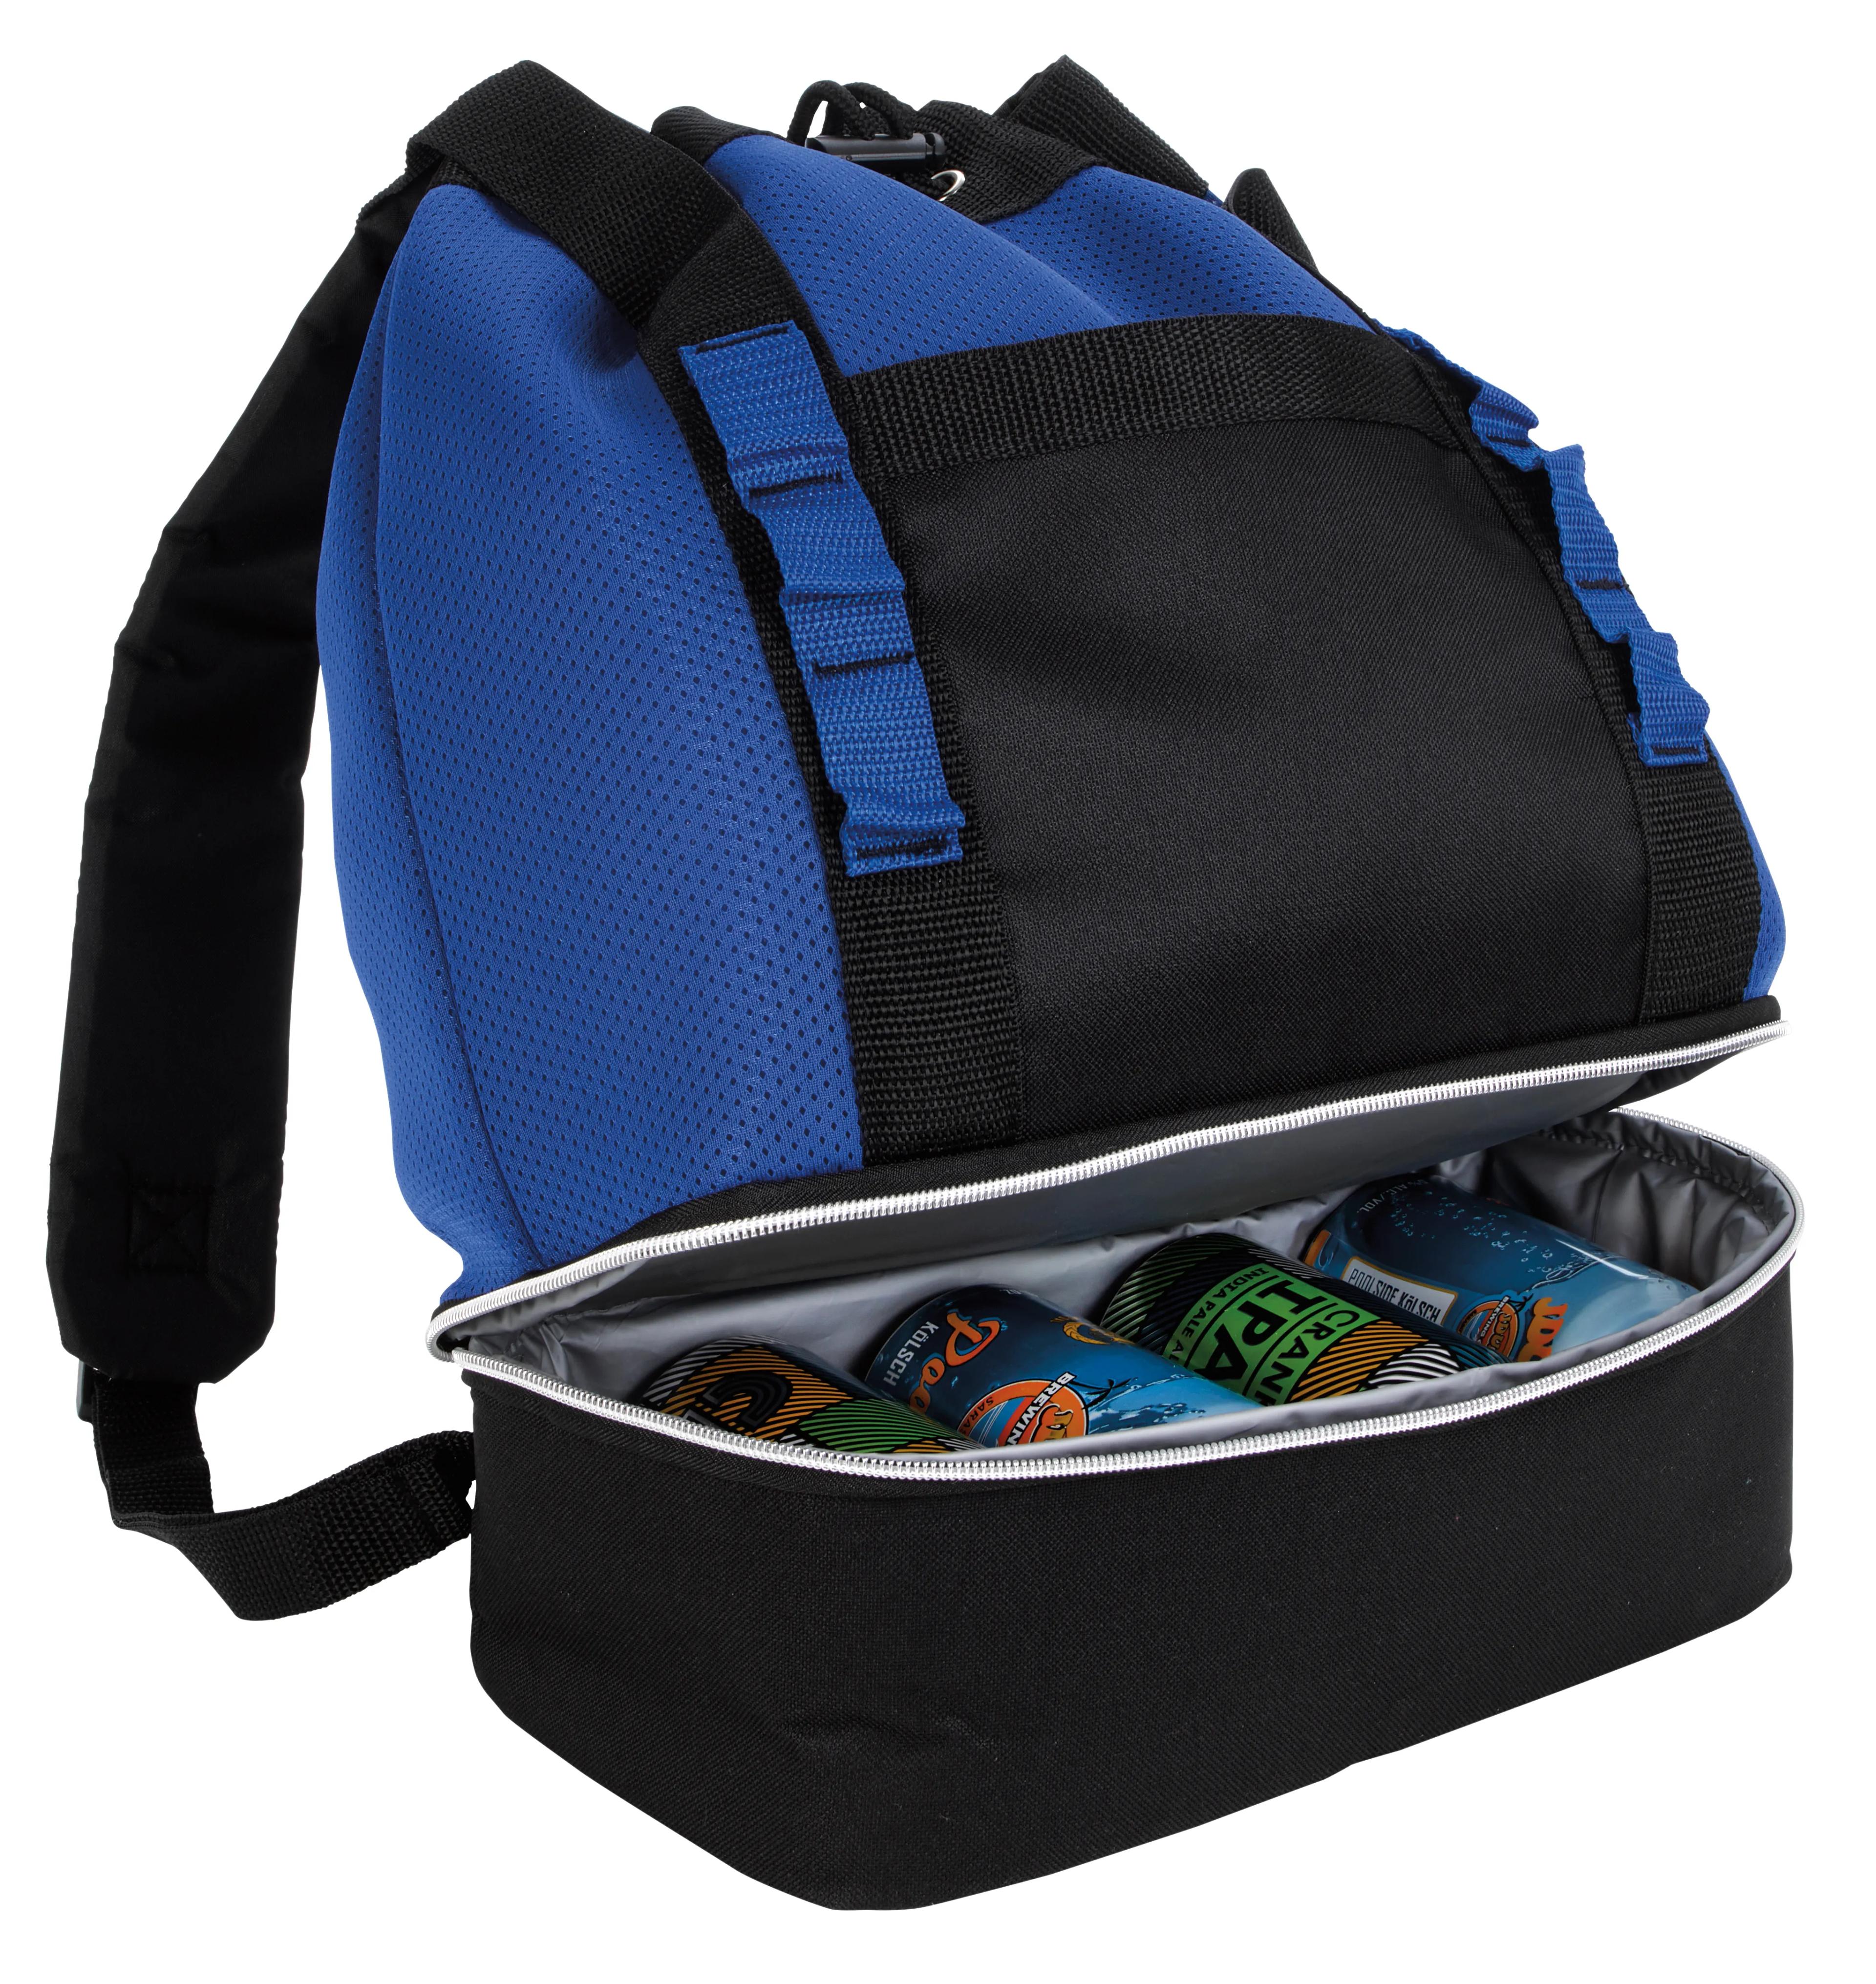 Brightwater Dual-Compartment Tote-Pack Cooler 27 of 43